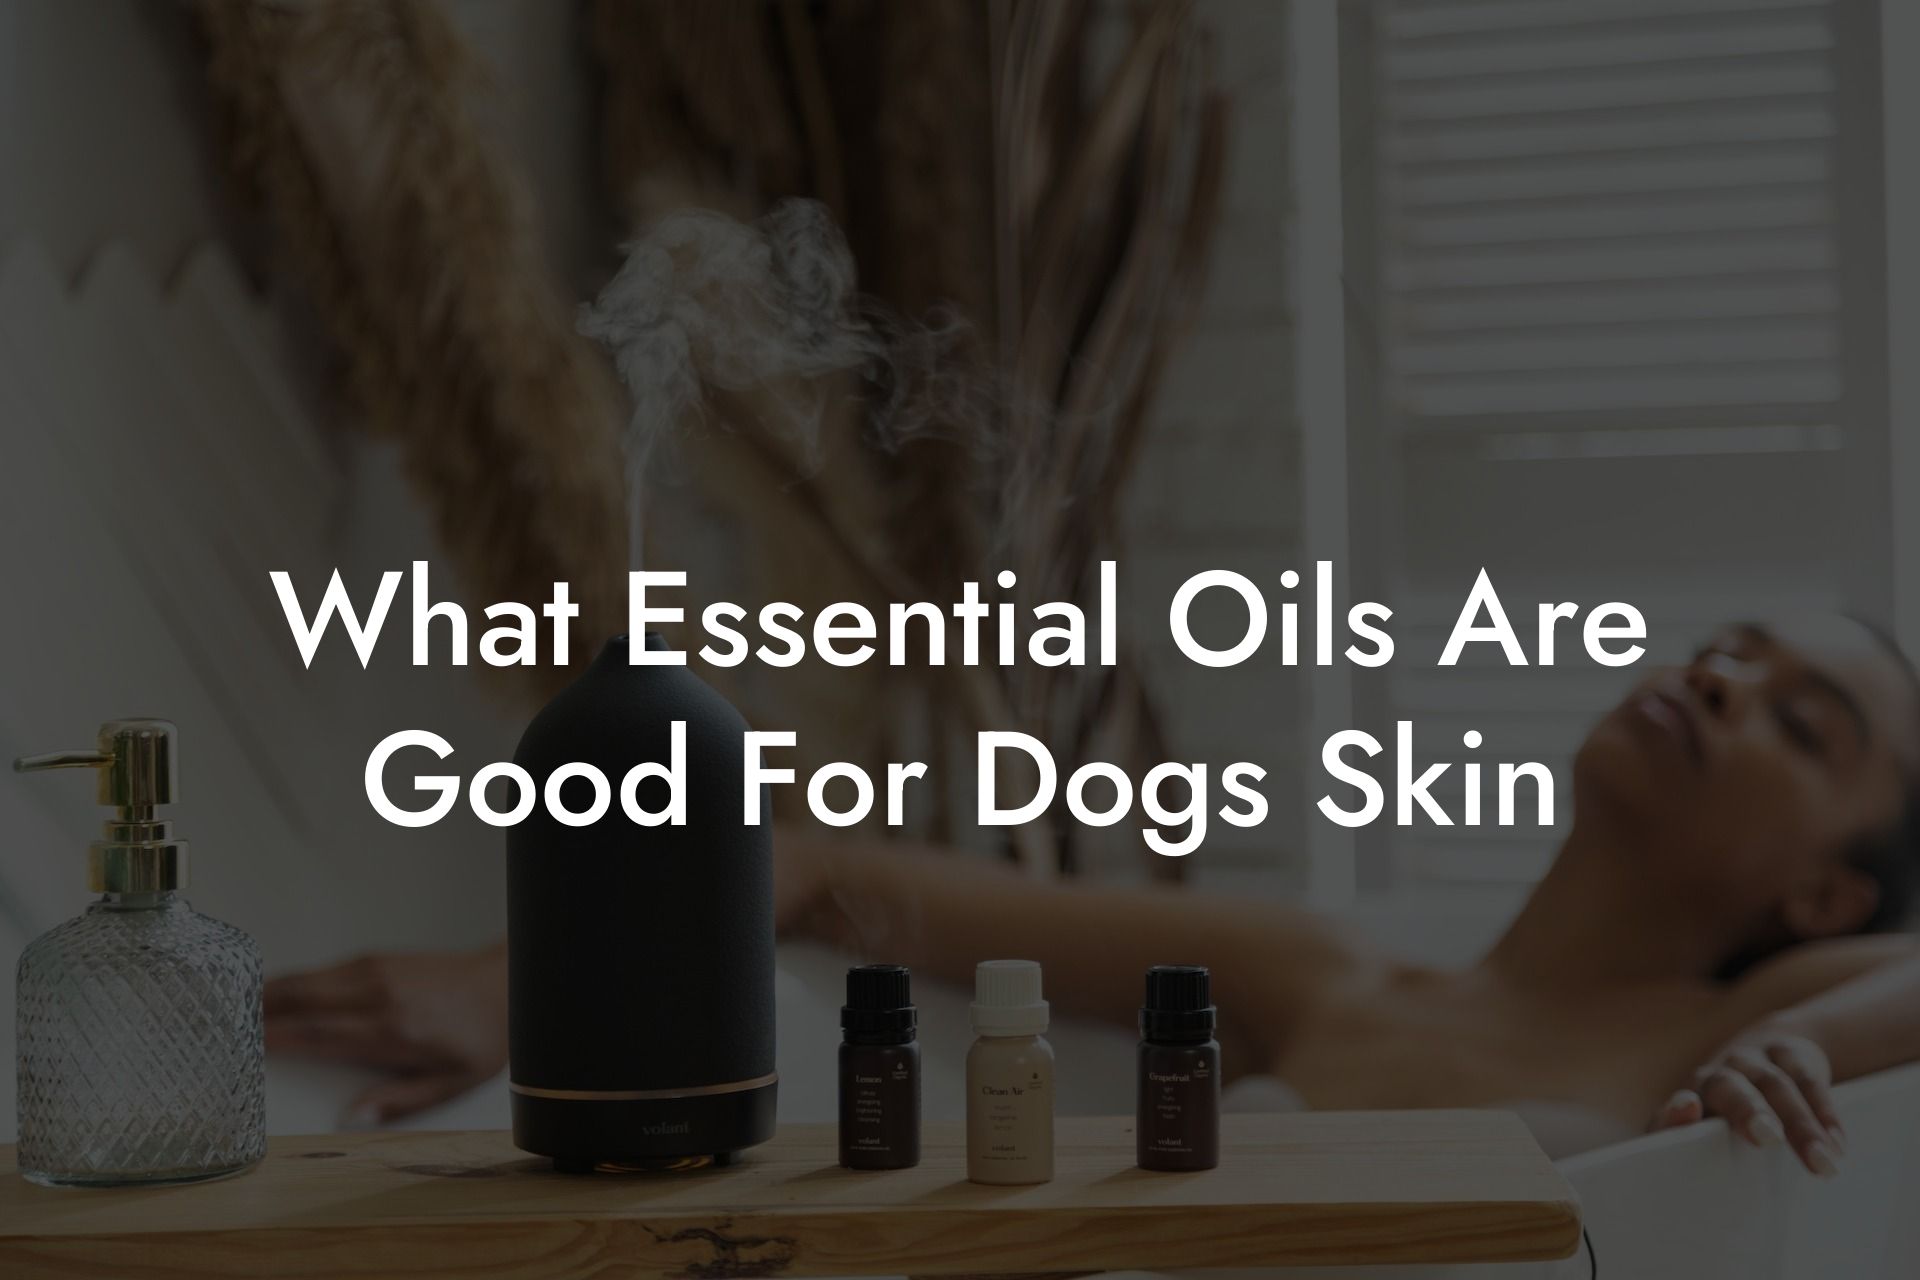 What Essential Oils Are Good For Dogs Skin